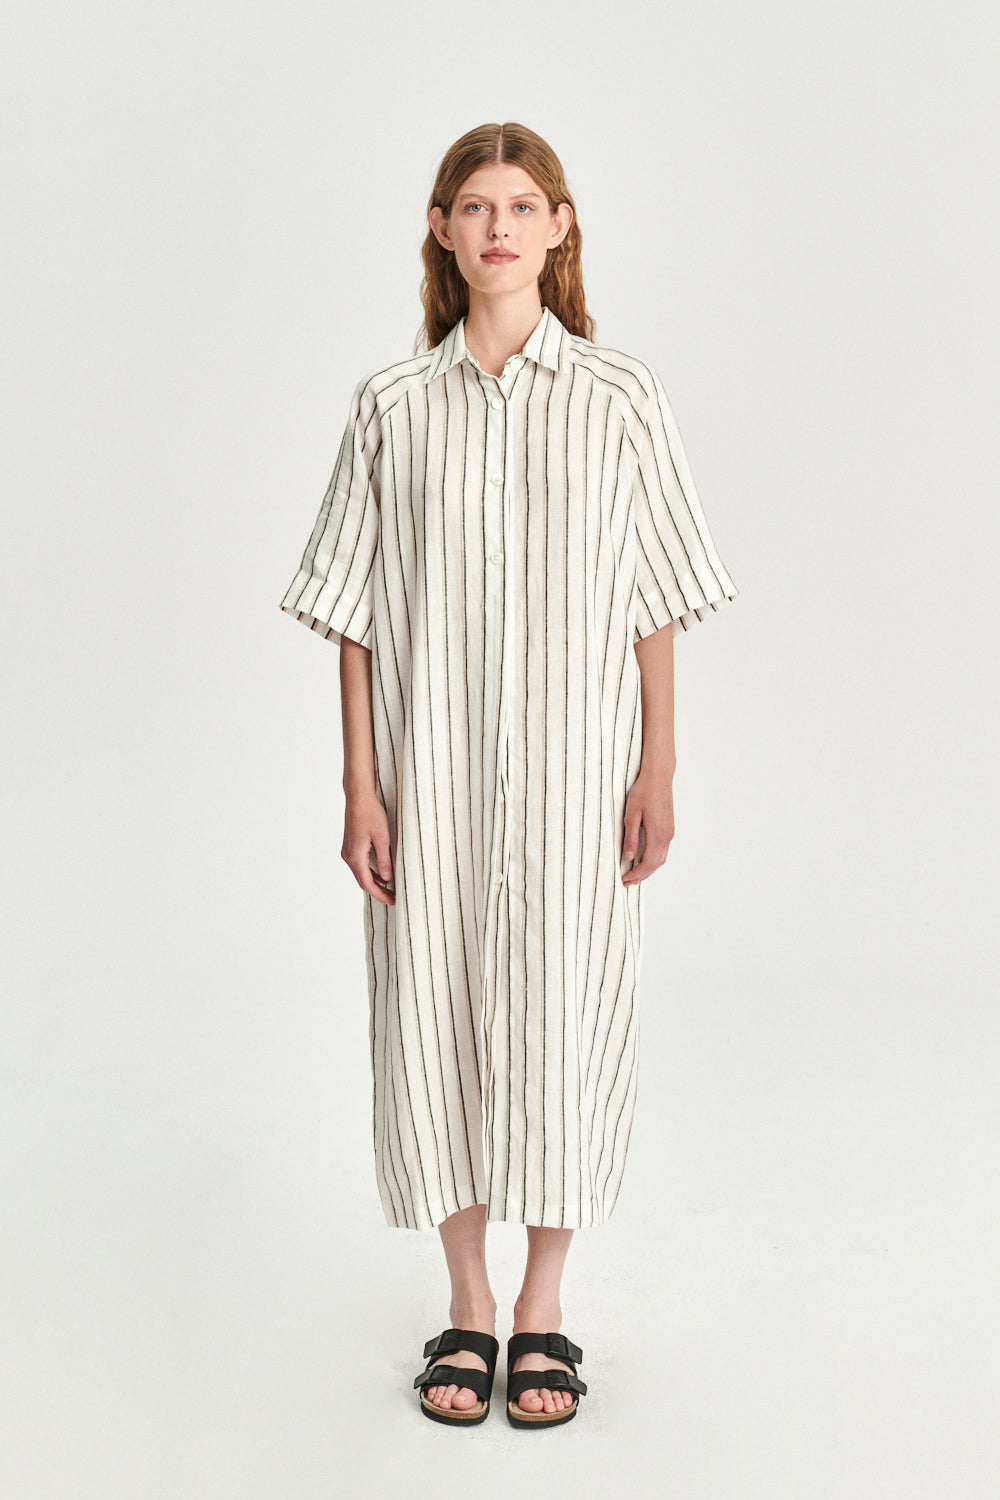 Dress in a White and Black Striped Linen